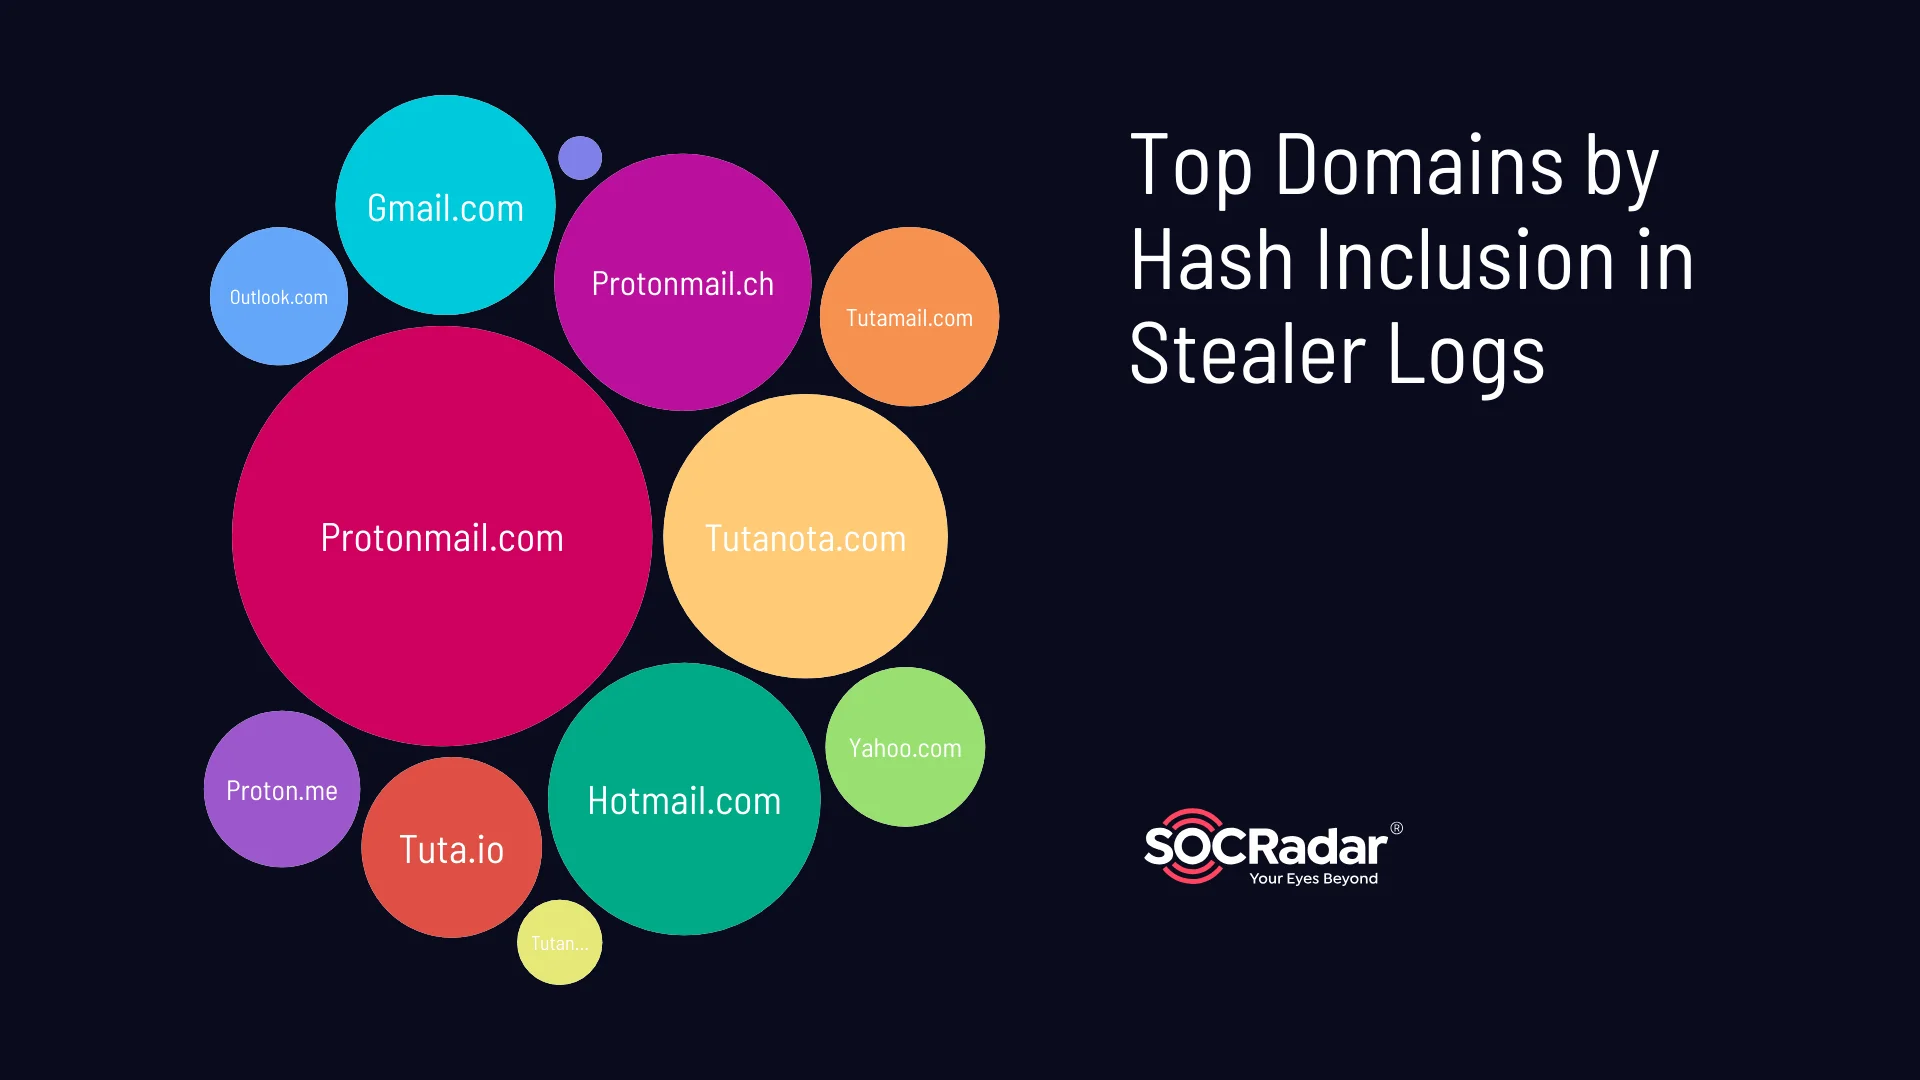 Top domains by hash inclusion